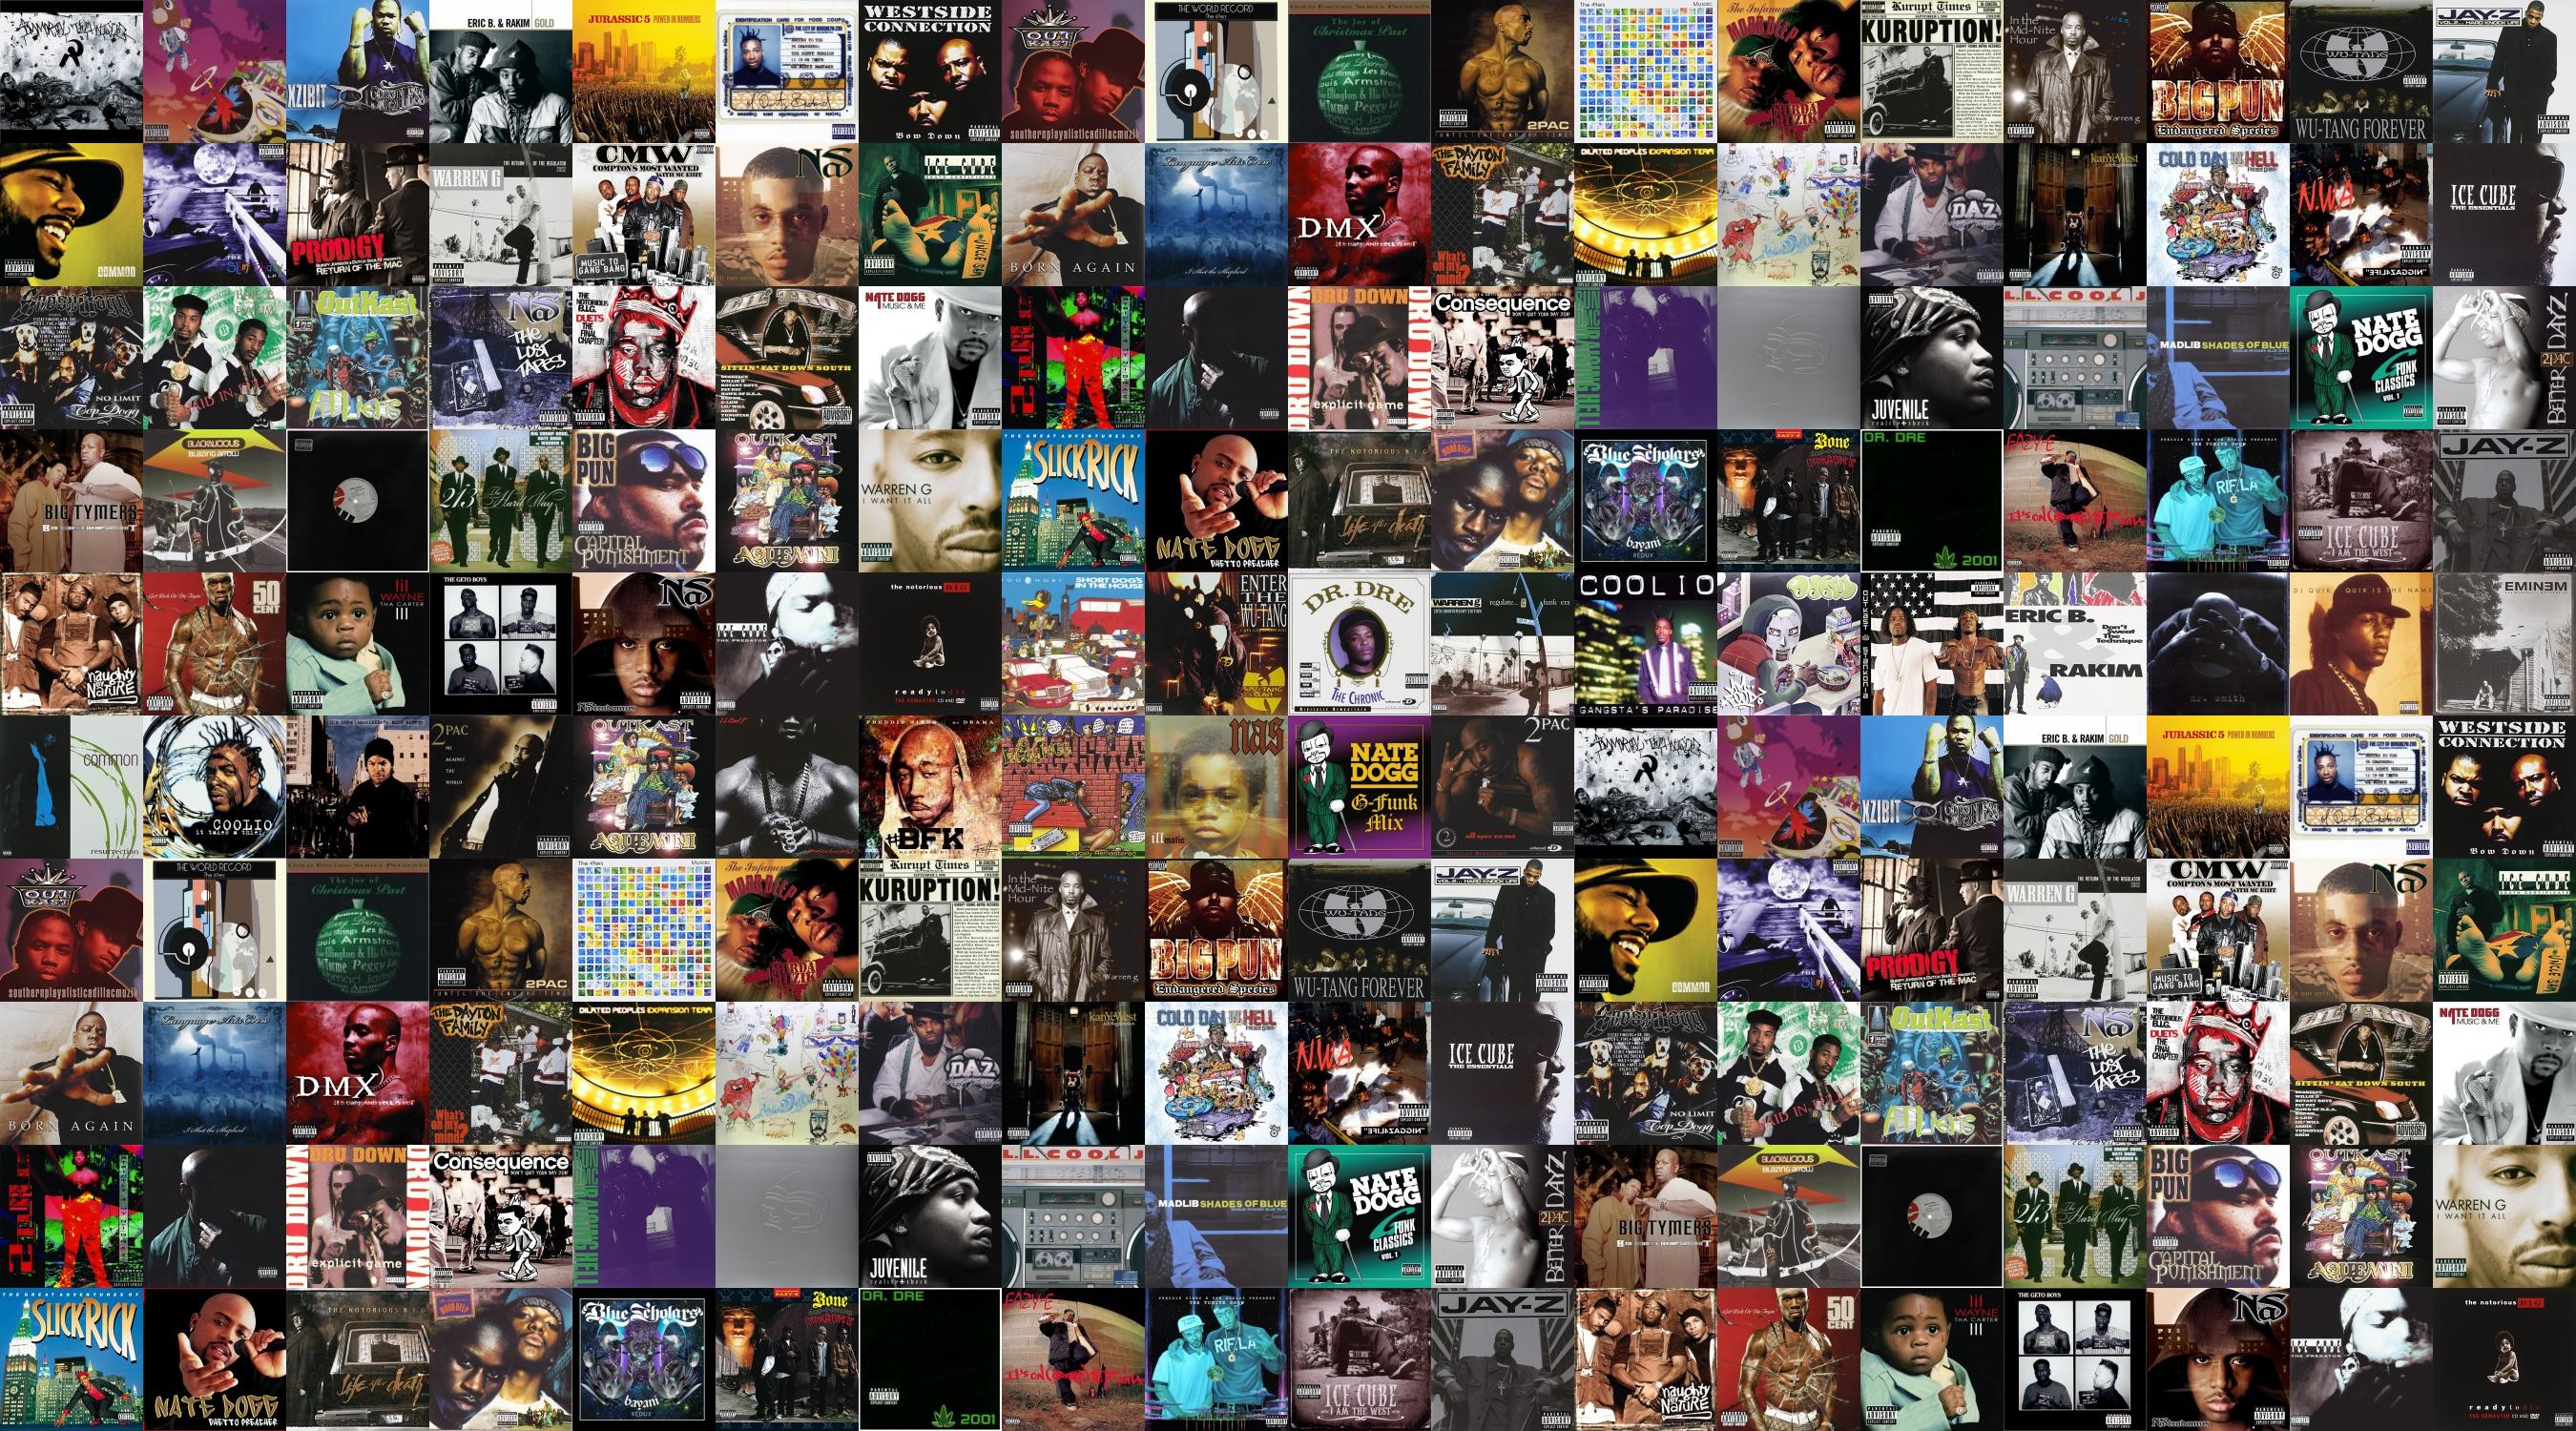 2700x1500 Download this free wallpaper with images of Immortal Technique –  Revolutionary Vol. 1, Kanye West – Graduation, Xzibit – Restless, Eric B  And Rakim – Gold, ...